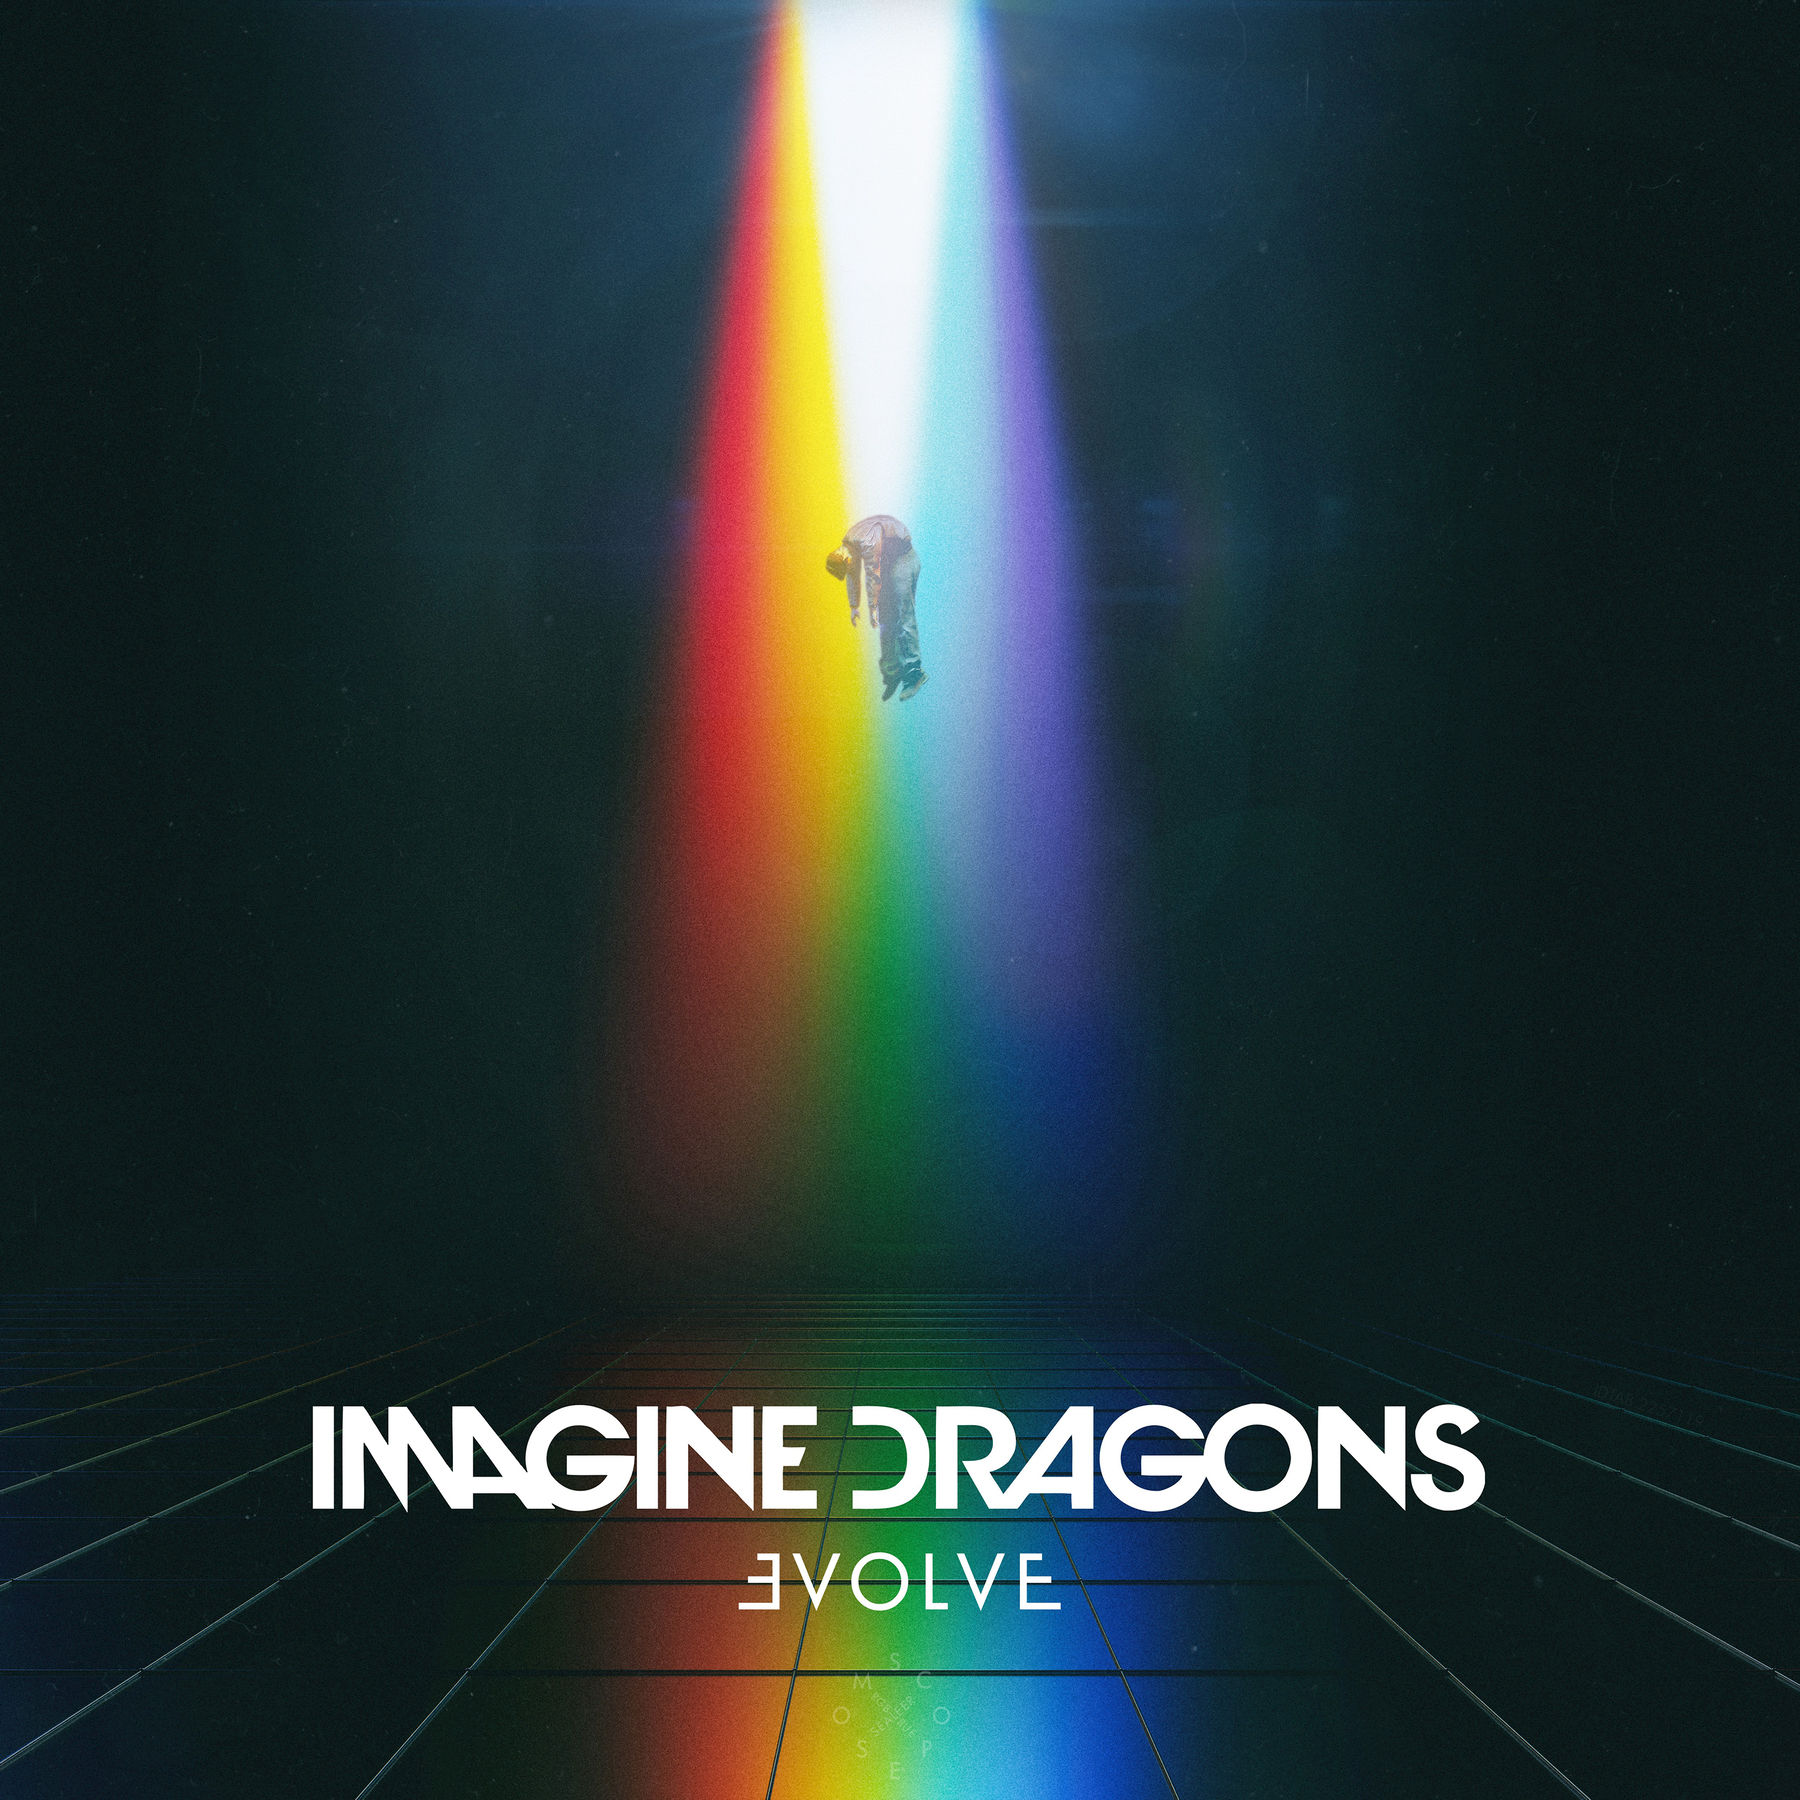 Imagine Dragons Thunder - Mp3free4all Music Charts - Youtube Music Videos - iTunes Mp3 Downloads